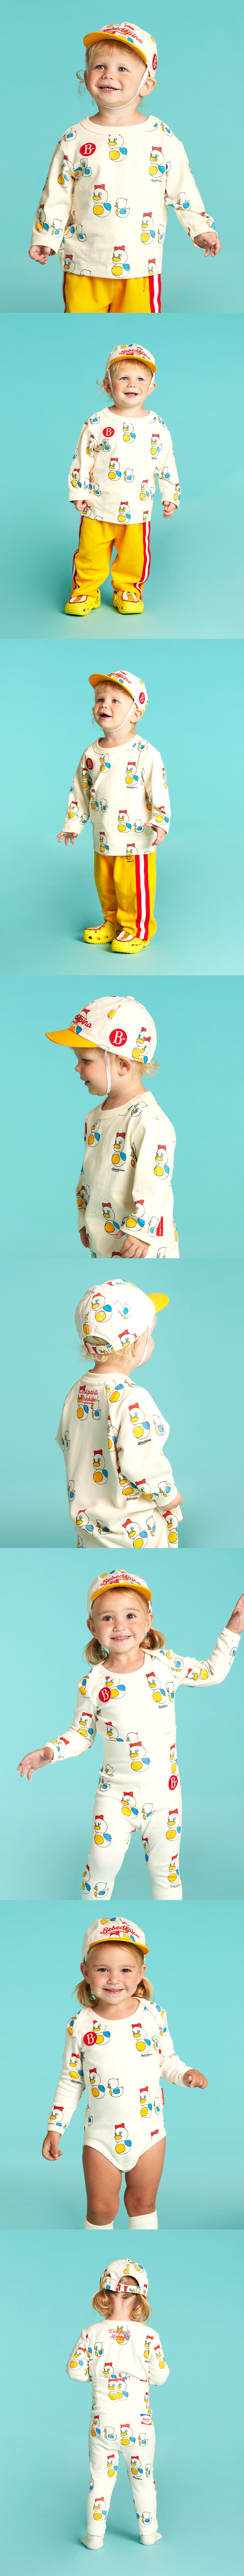 All over famille canard baby cap 상세 이미지